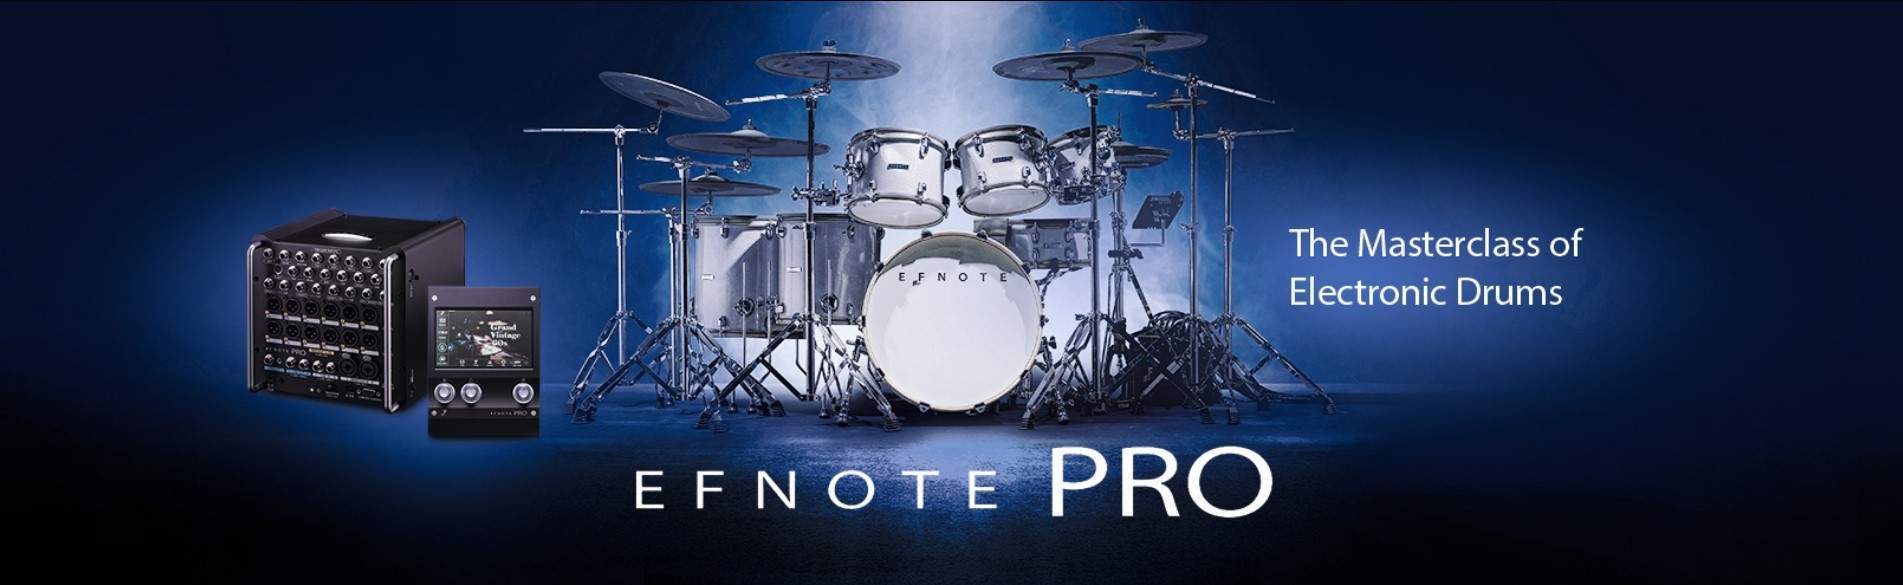 FOTO-EFNOTE-PRO-MASTERCLASS-OF-ELECTRONIC-DRUMS